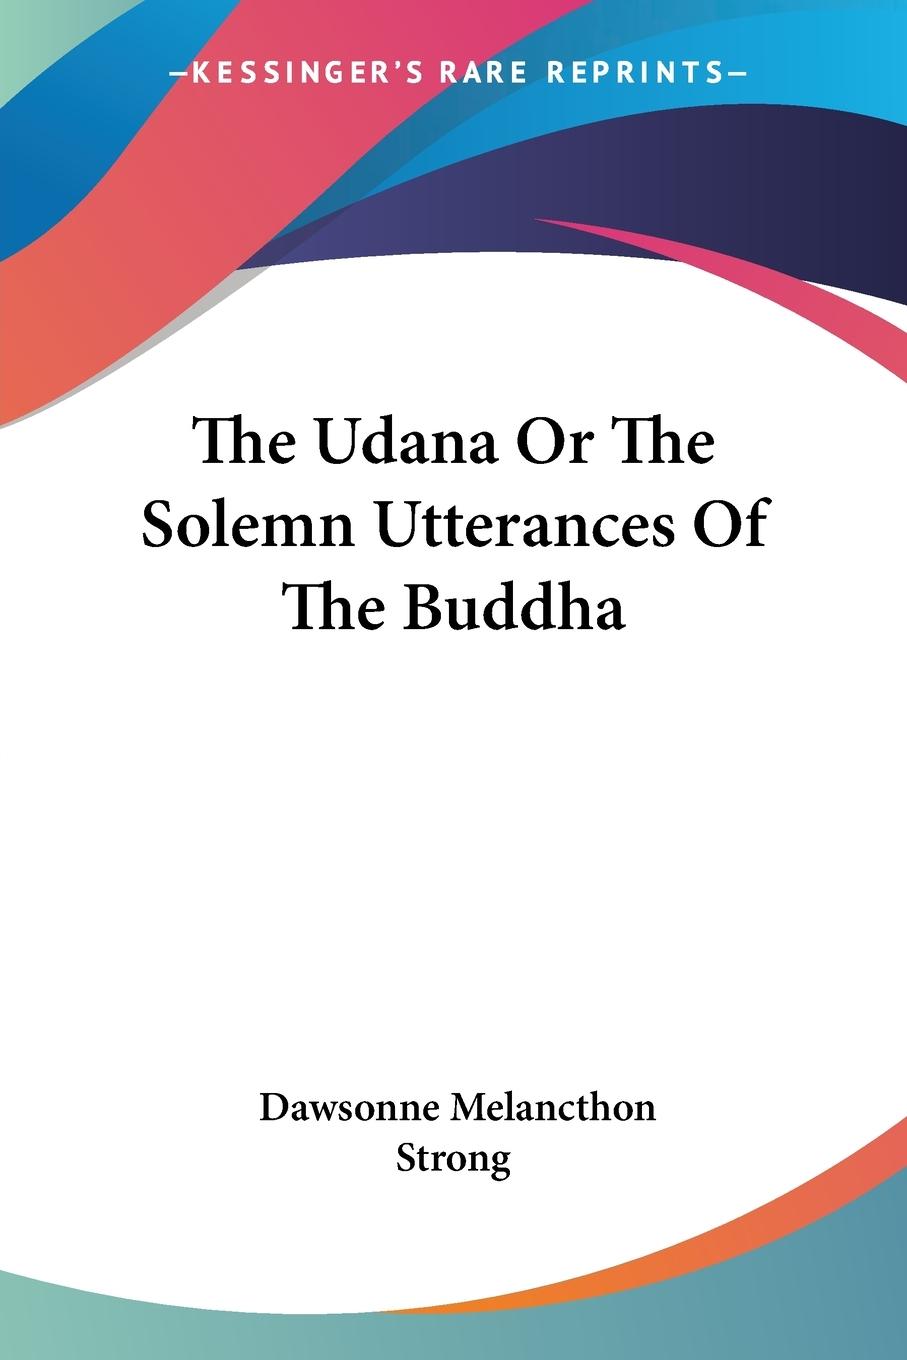 The Udana Or The Solemn Utterances Of The Buddha